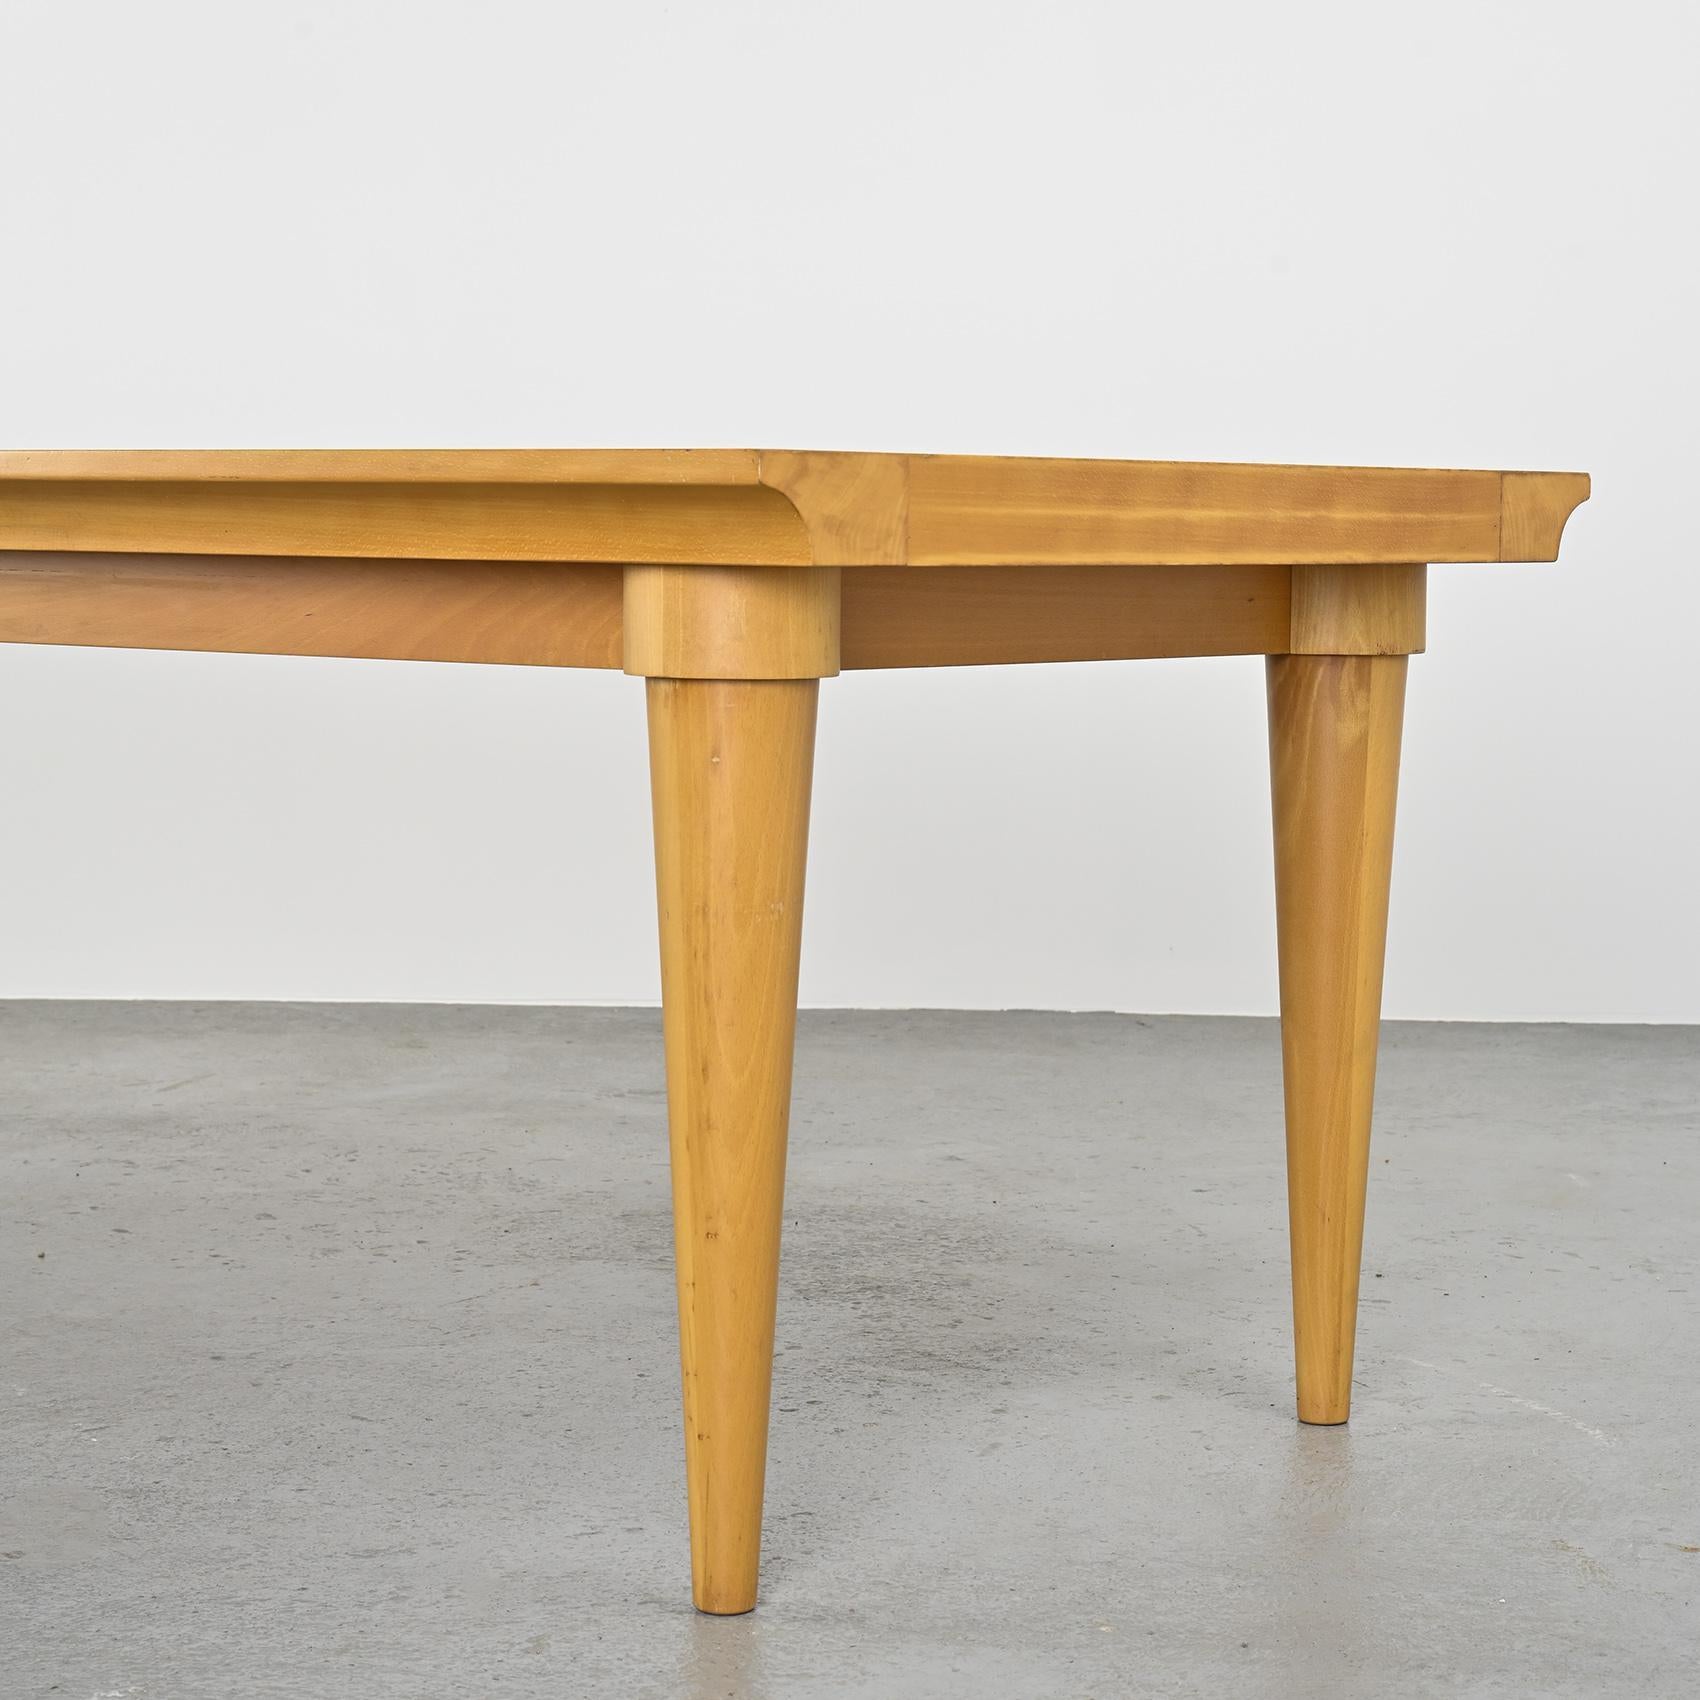 Italian Design Solid Beech Dining Table, Driade circa 1980 For Sale